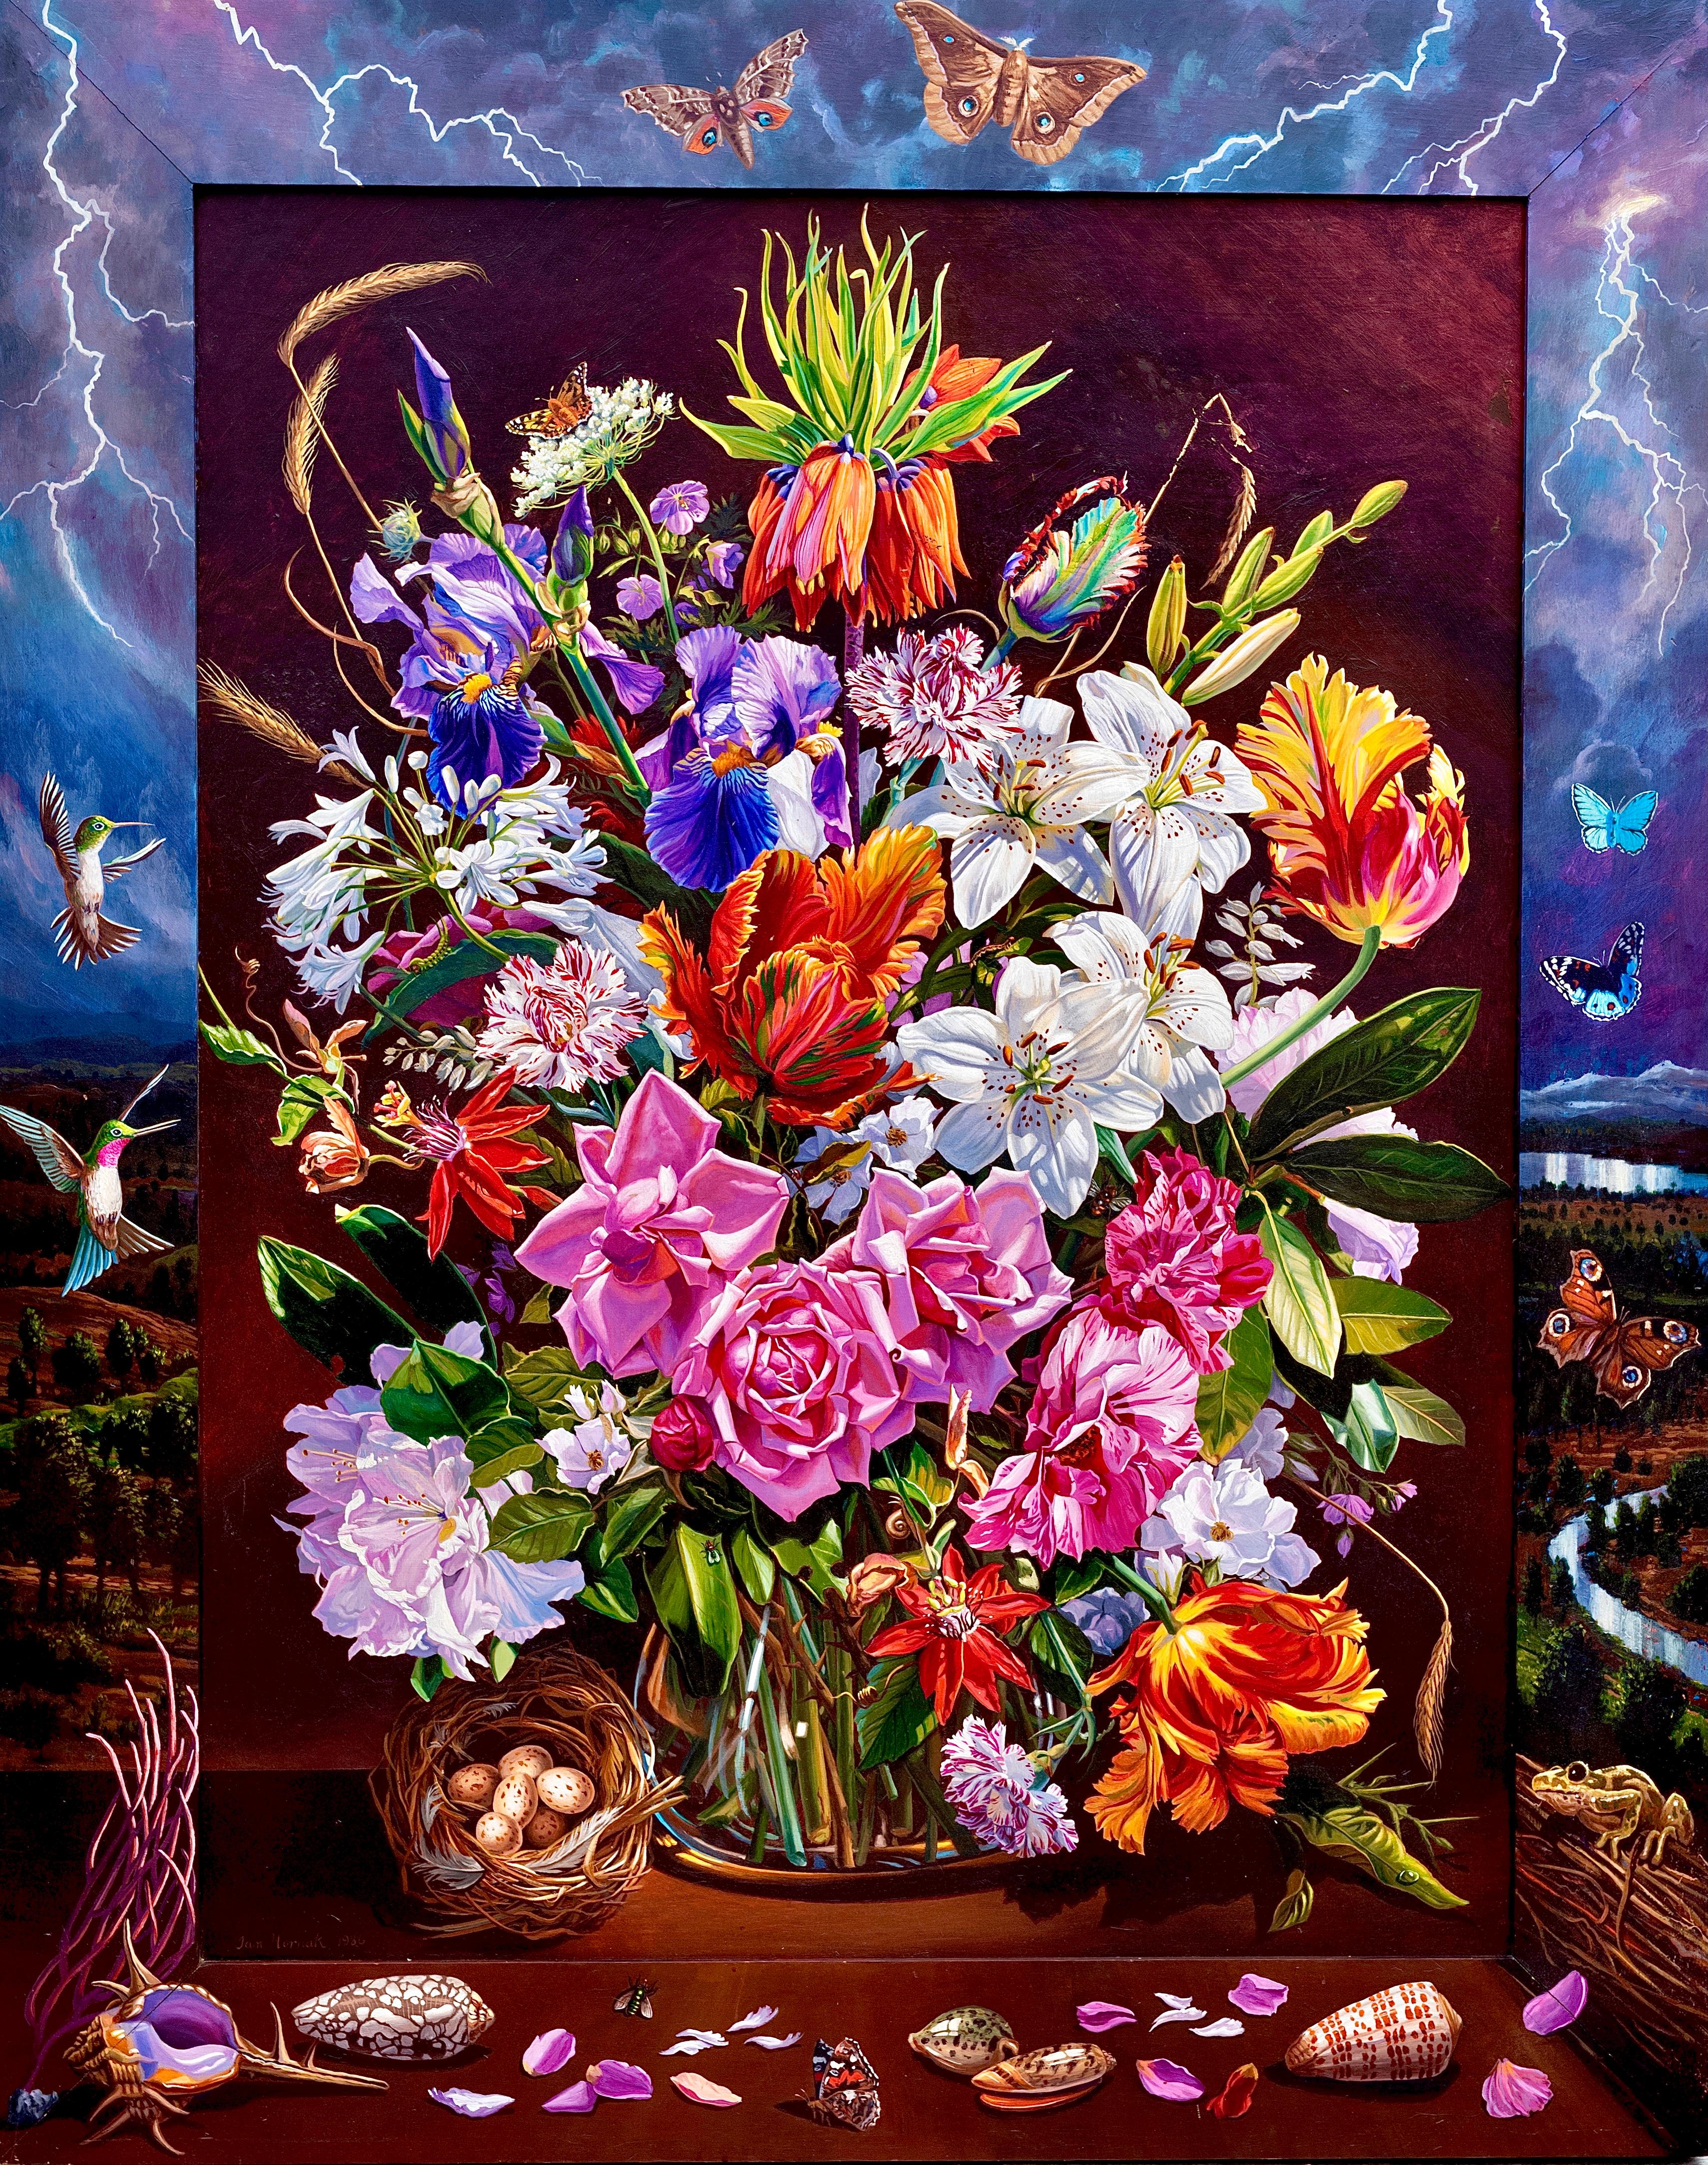 Ian Hornak Still-Life Painting - “Flower Piece with Storm, ” Photorealism & Hyperrealism